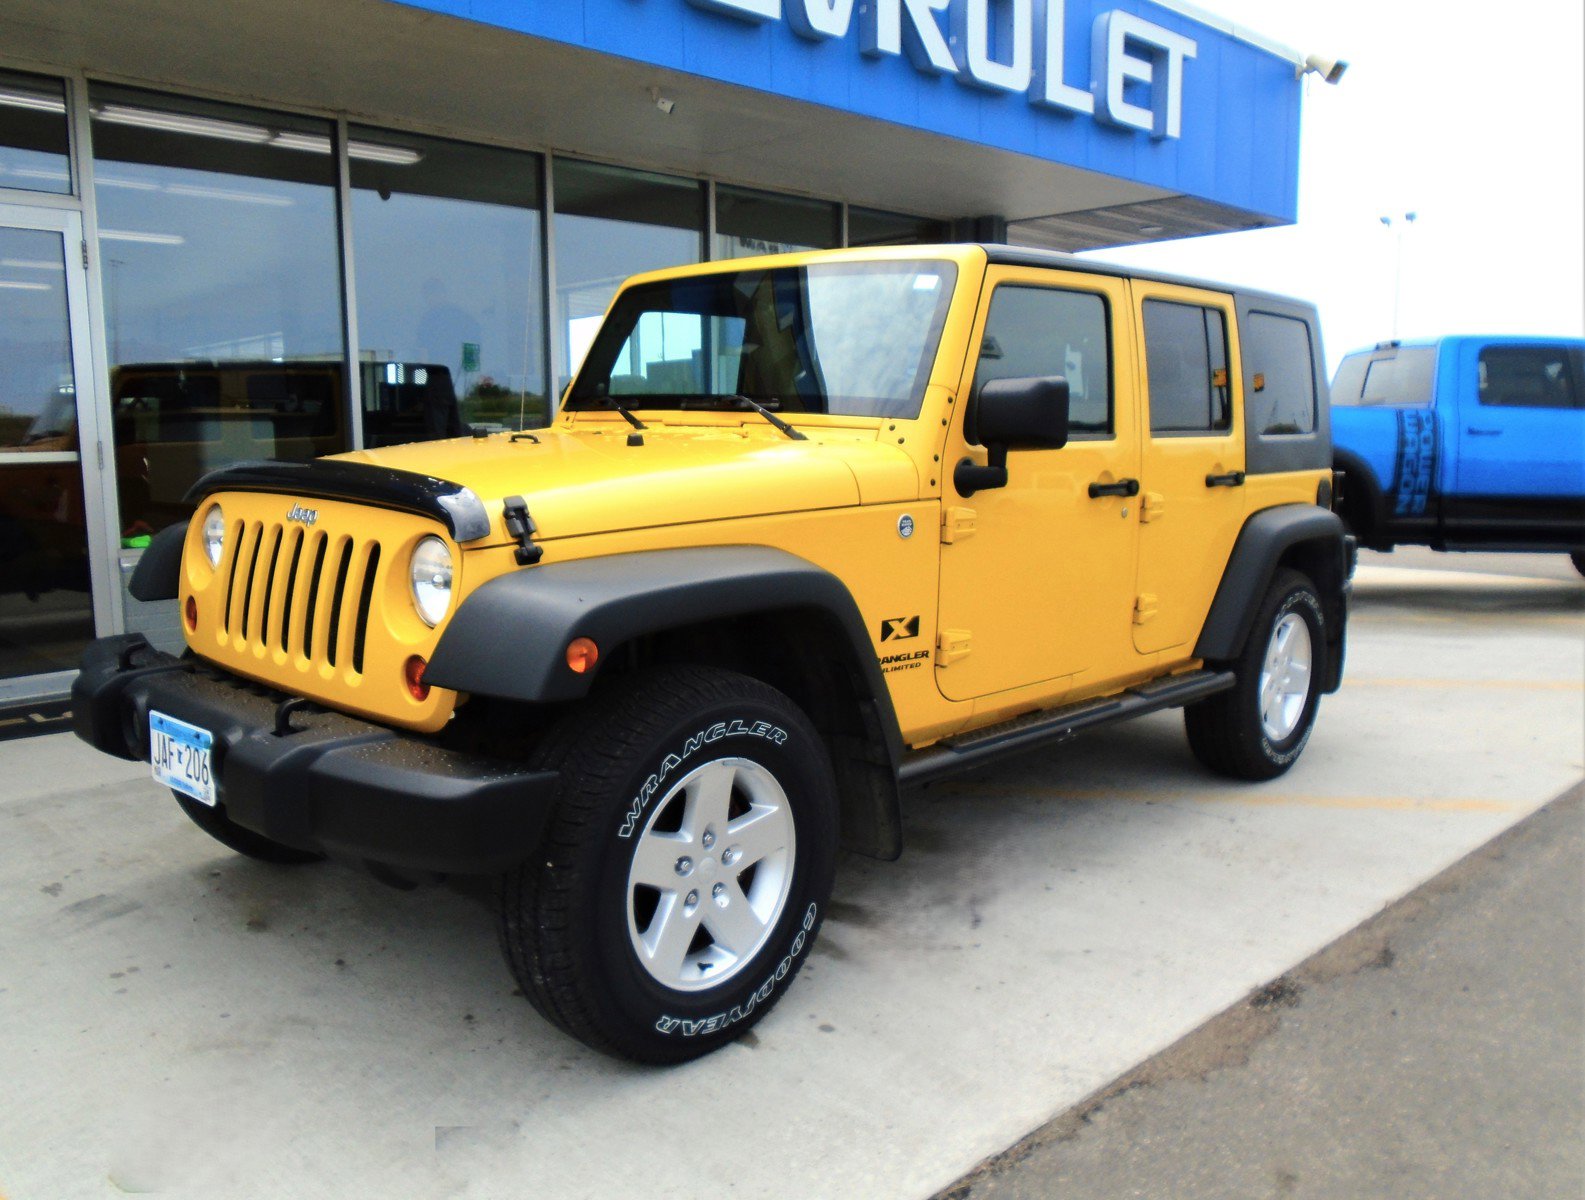 Used 2009 Jeep Wrangler Unlimited X with VIN 1J4GA39129L763751 for sale in Sauk Centre, Minnesota